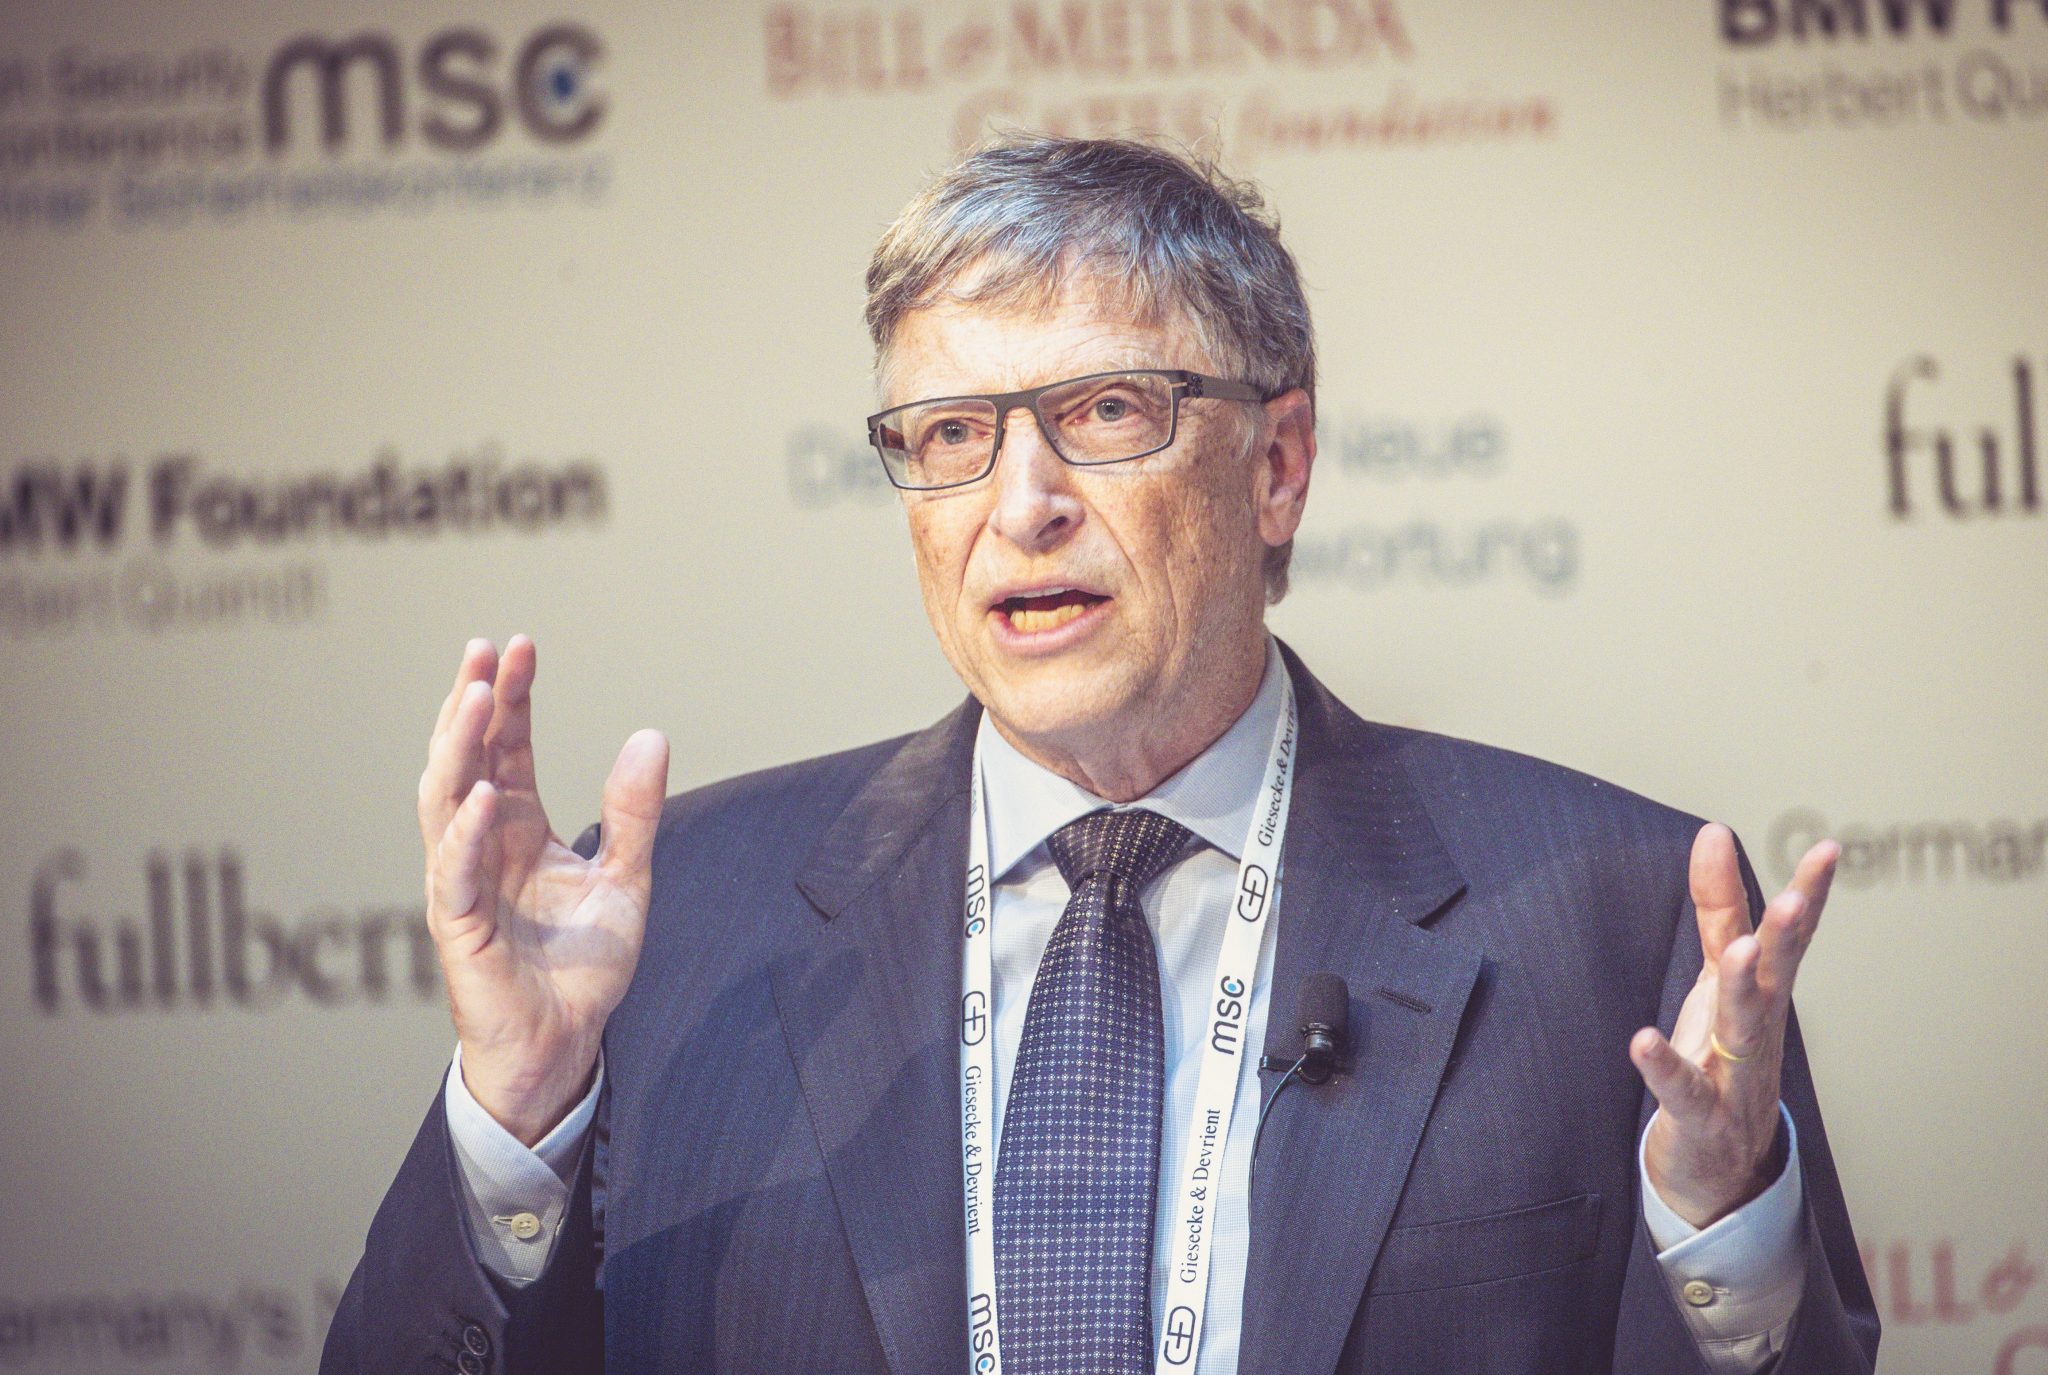 What were Bill Gates weaknesses?